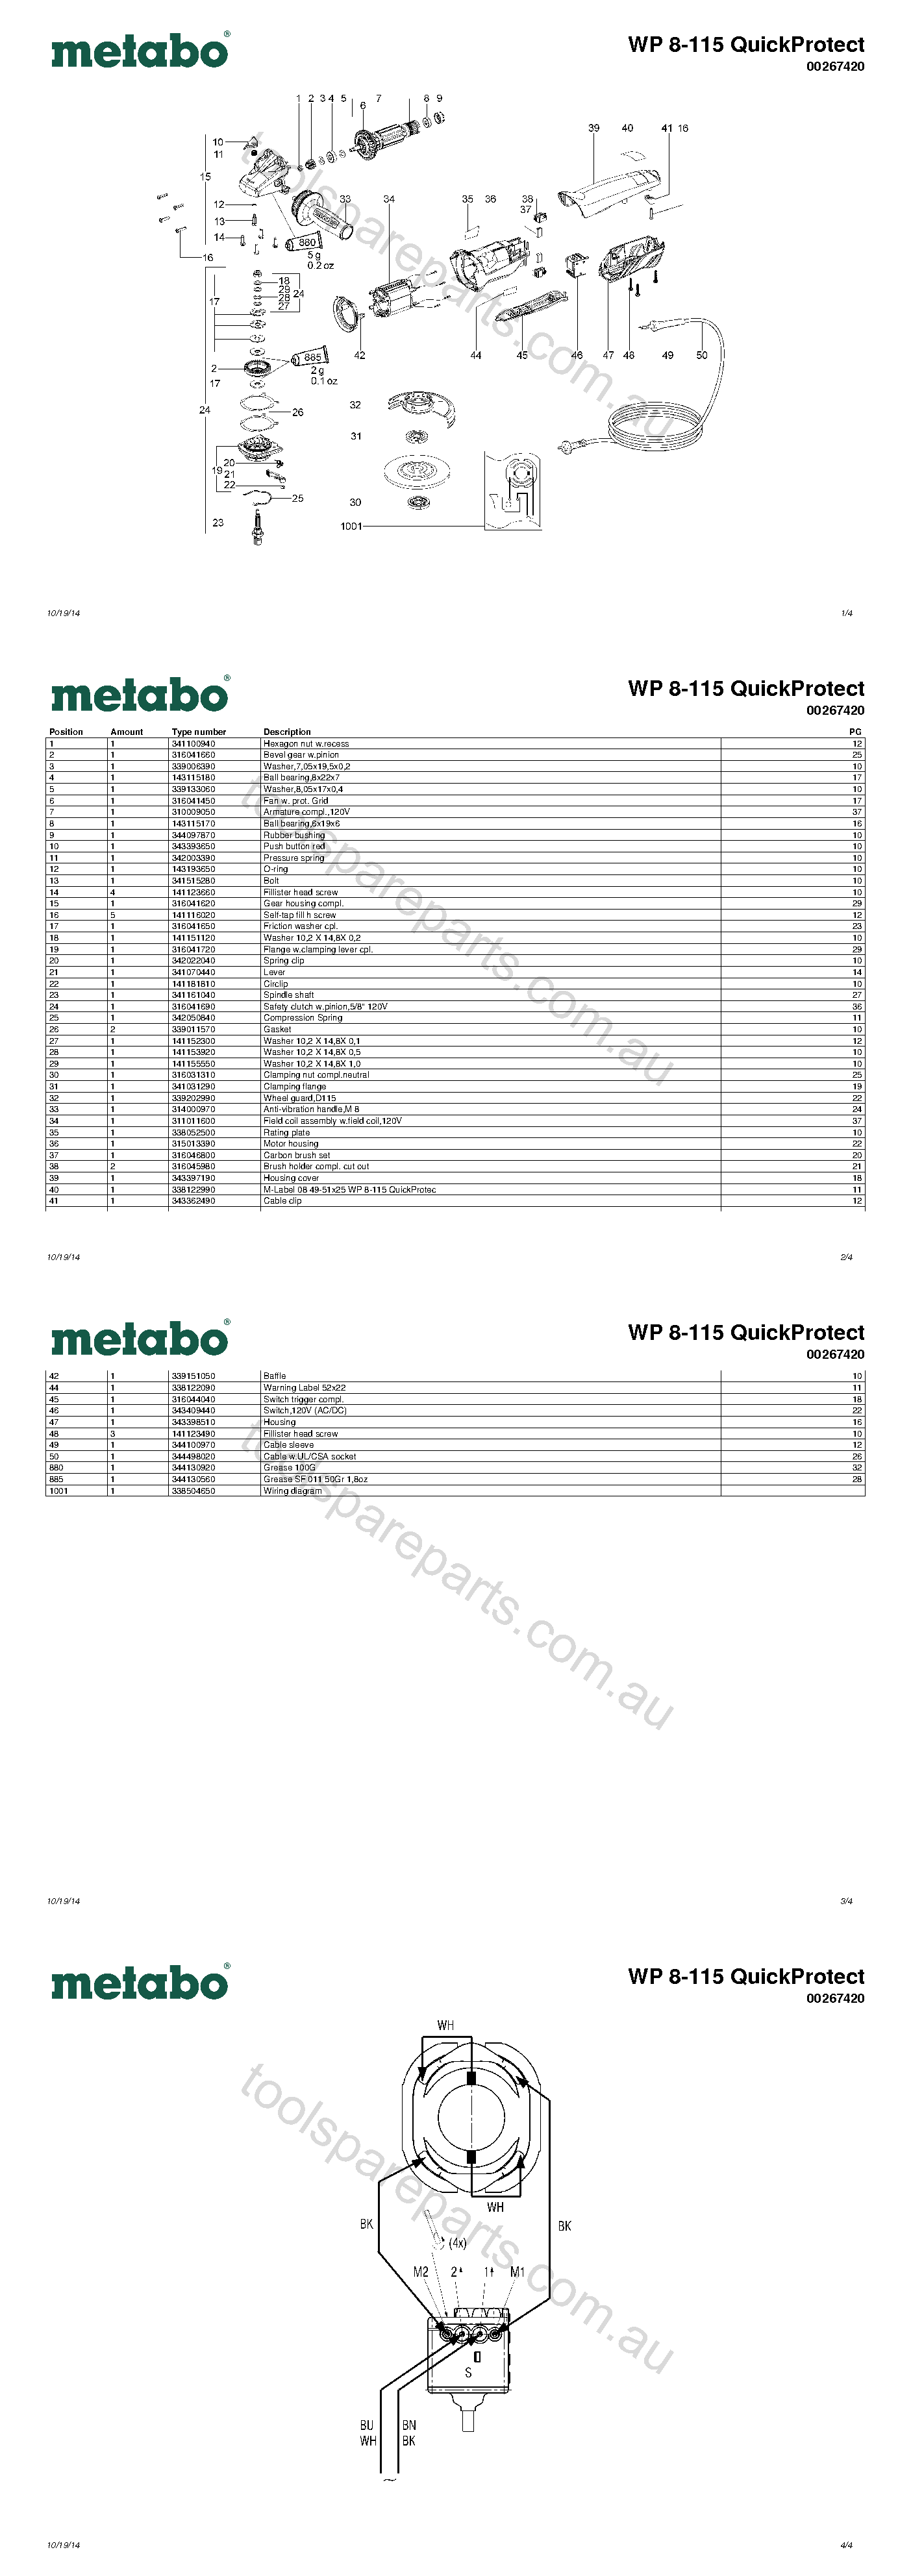 Metabo WP 8-115 QuickProtect 00267420  Diagram 1